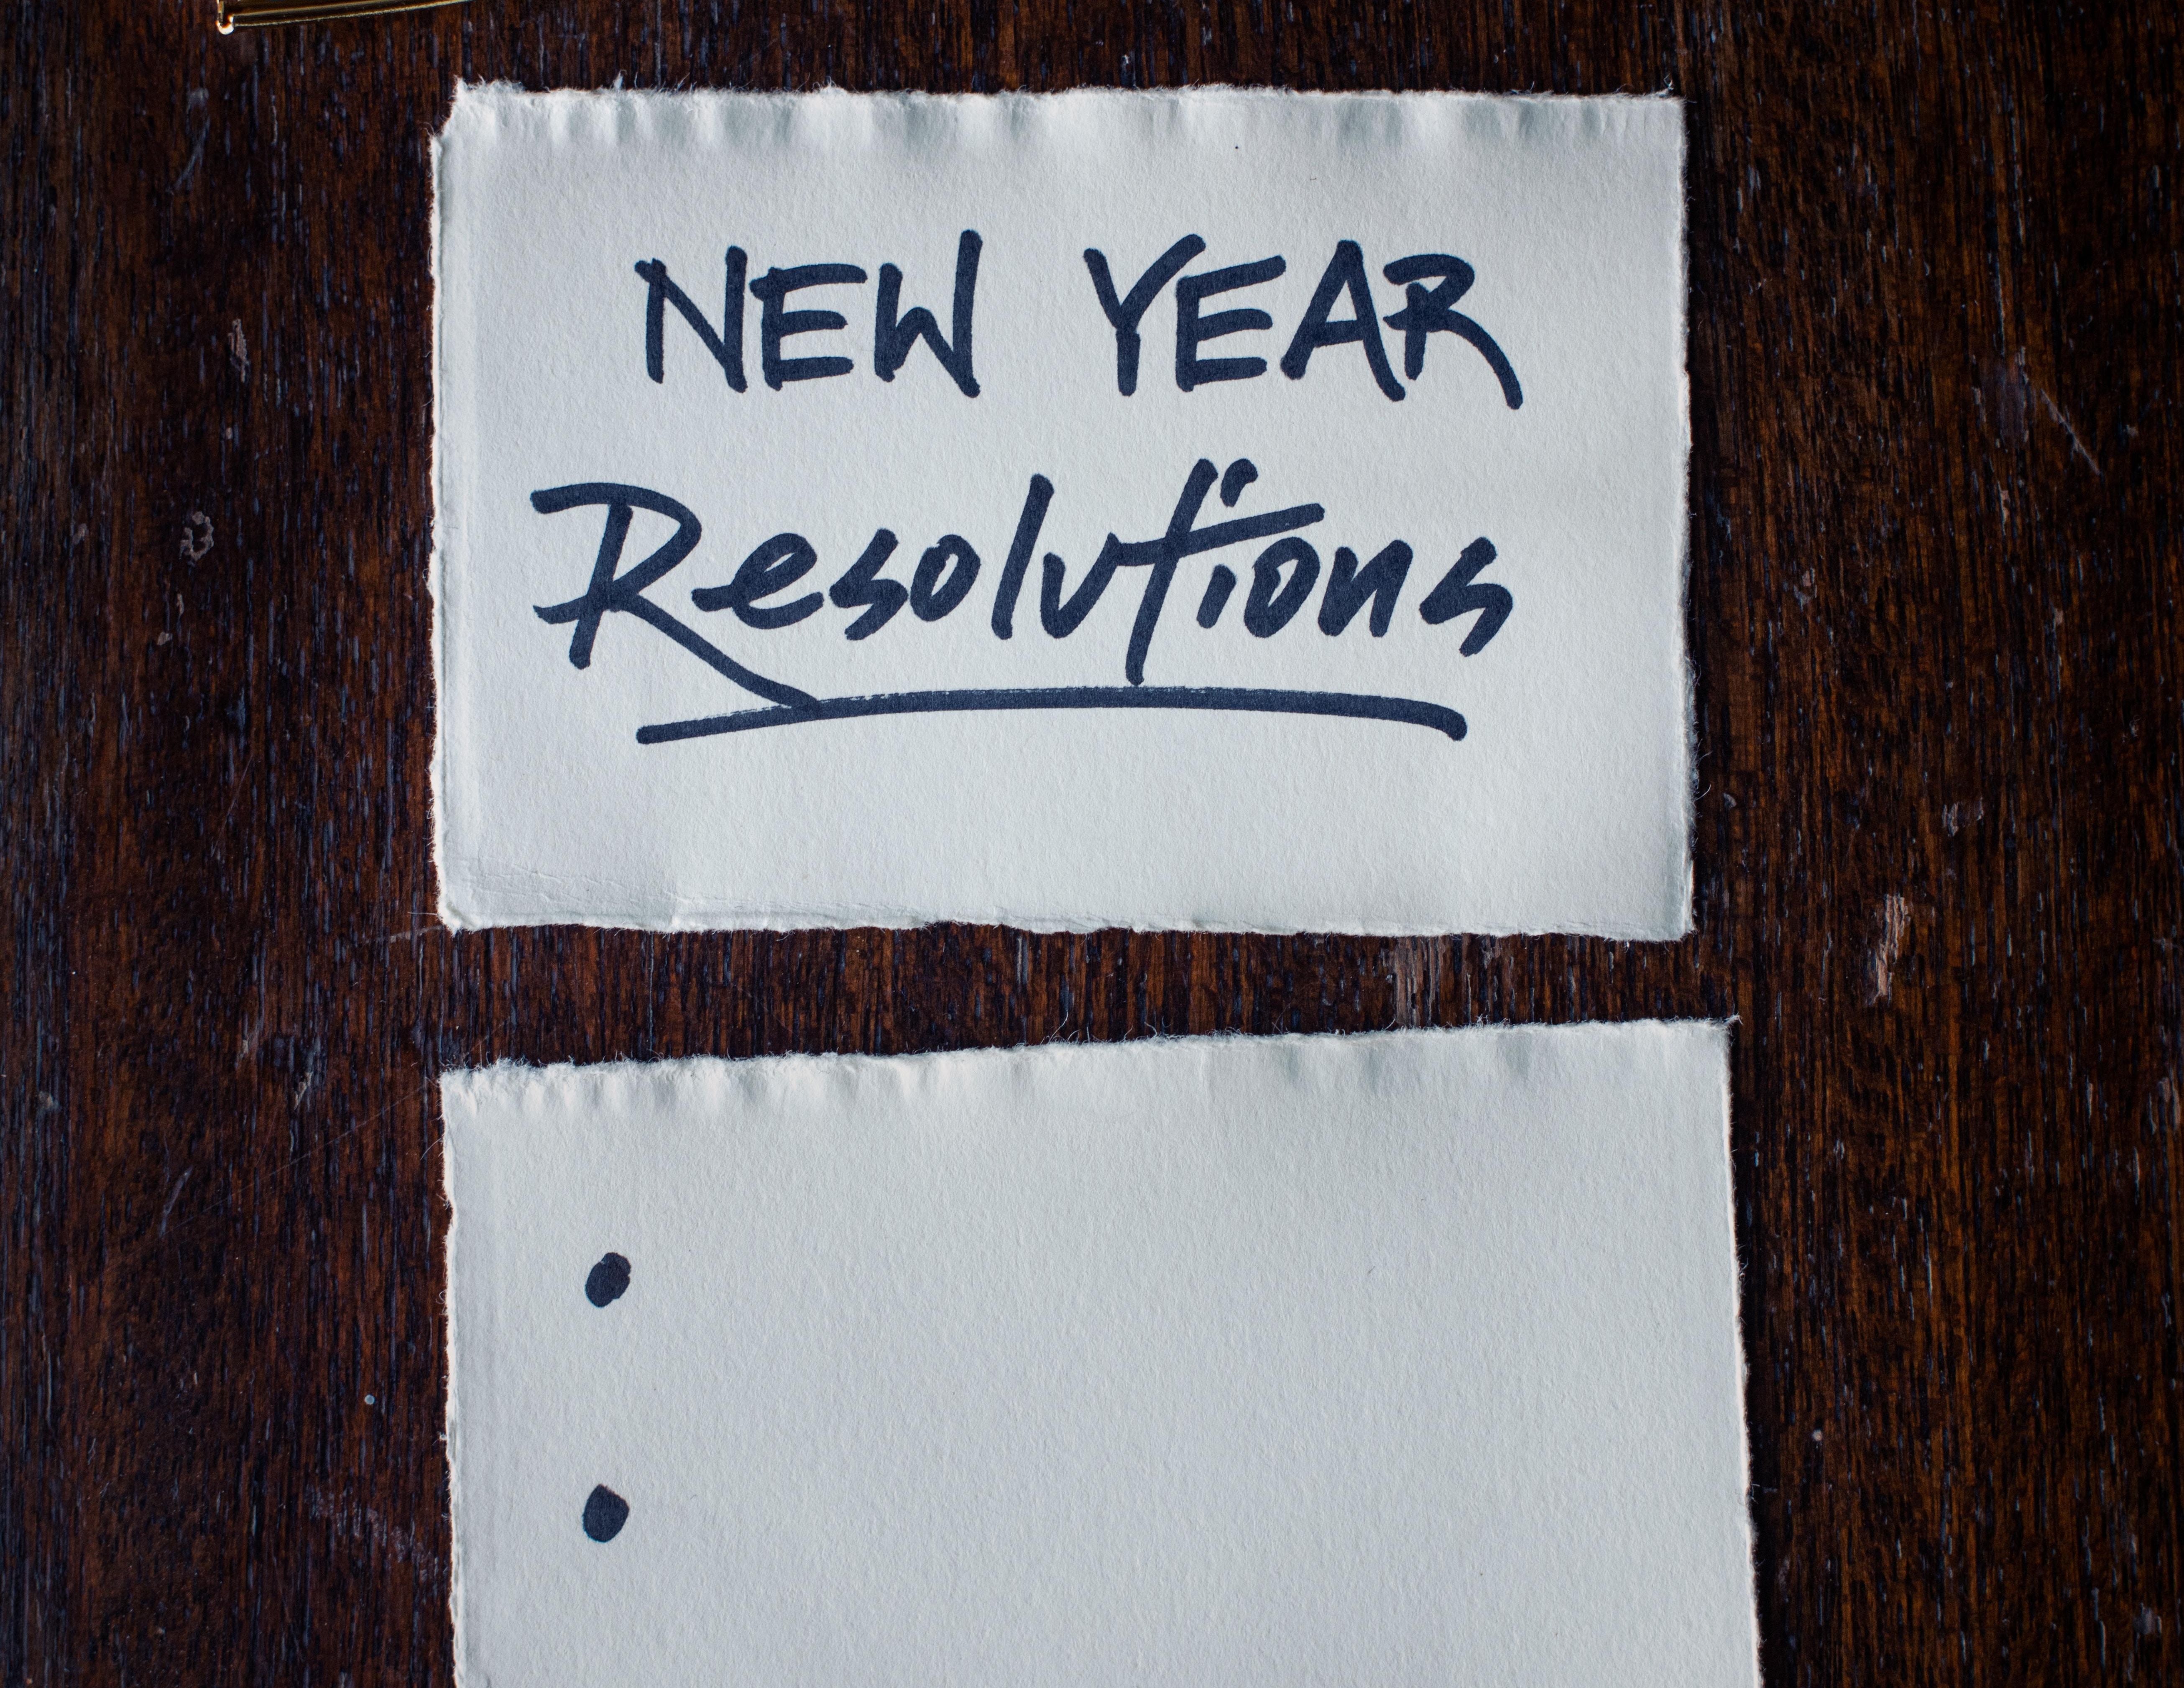 Let's Redefine New Year's Resolutions